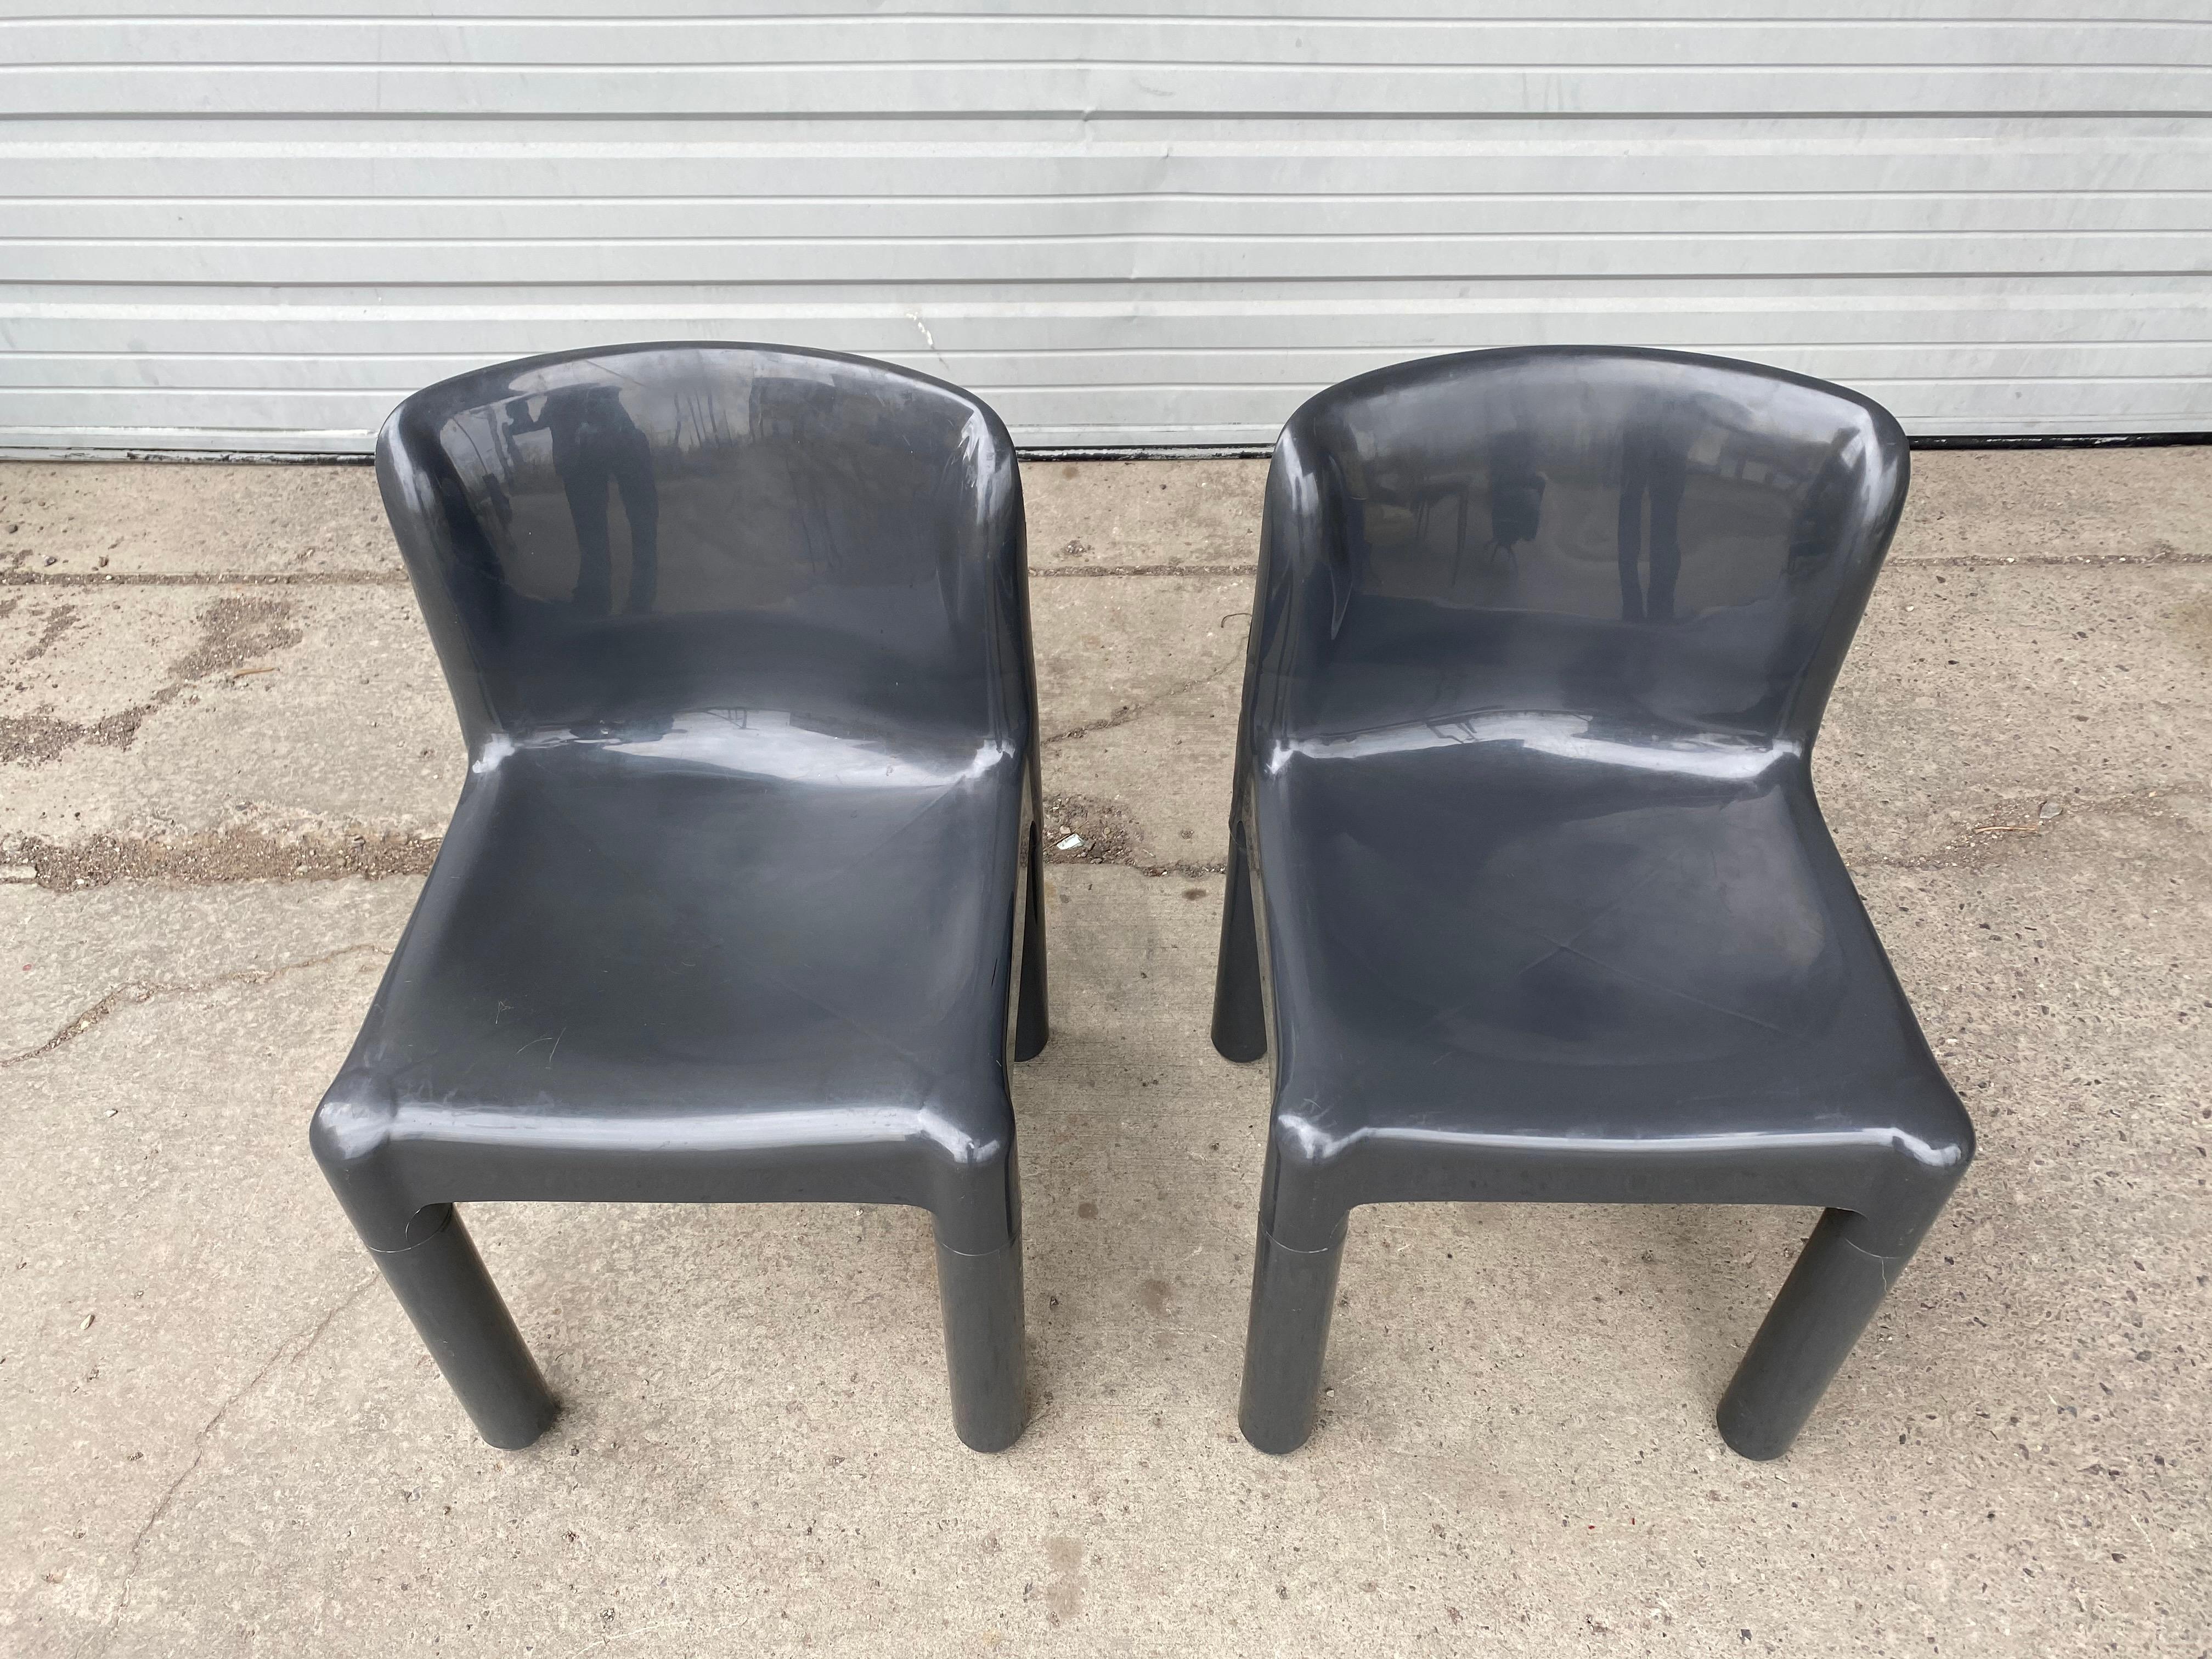 Early pair of Italian Modernist Polypropylene chairs designed by Carlo Bartoli for Kartell Italia in the 1970s model 4875, unusual color, art furniture, Nice original condition, minor scratches, scuffs, age appropriate wear.